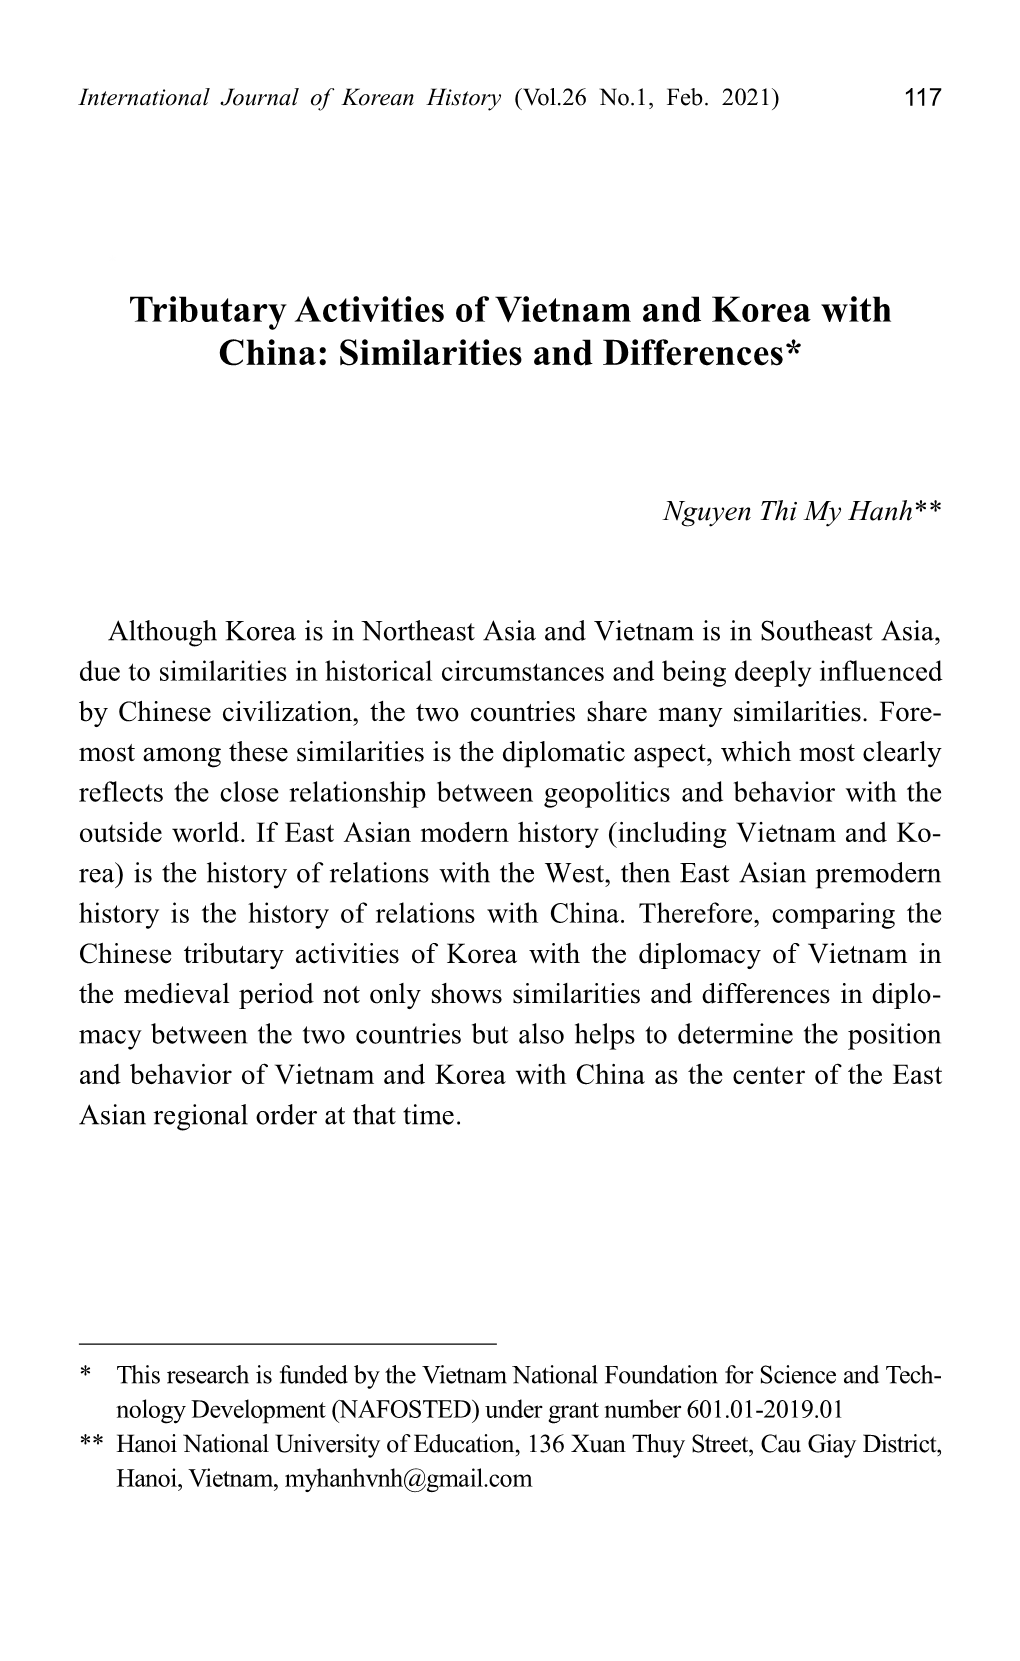 Tributary Activities of Vietnam and Korea with China: Similarities and Differences*